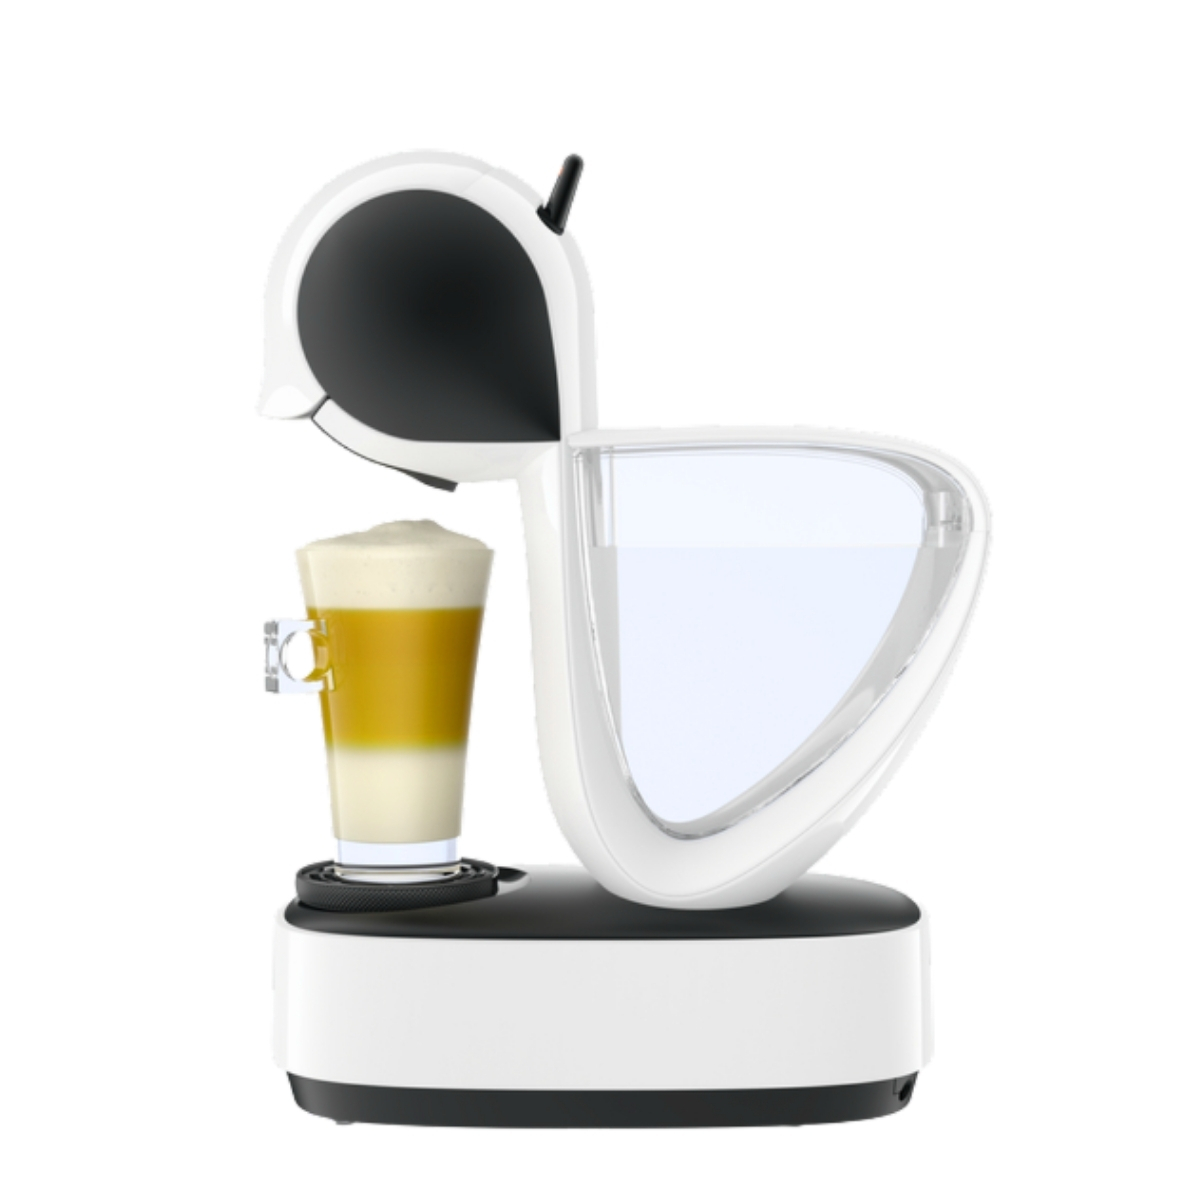 CAFETERA DOLCE GUSTO INFINISSIMA BLANCA TE CAFE CAPSULAS